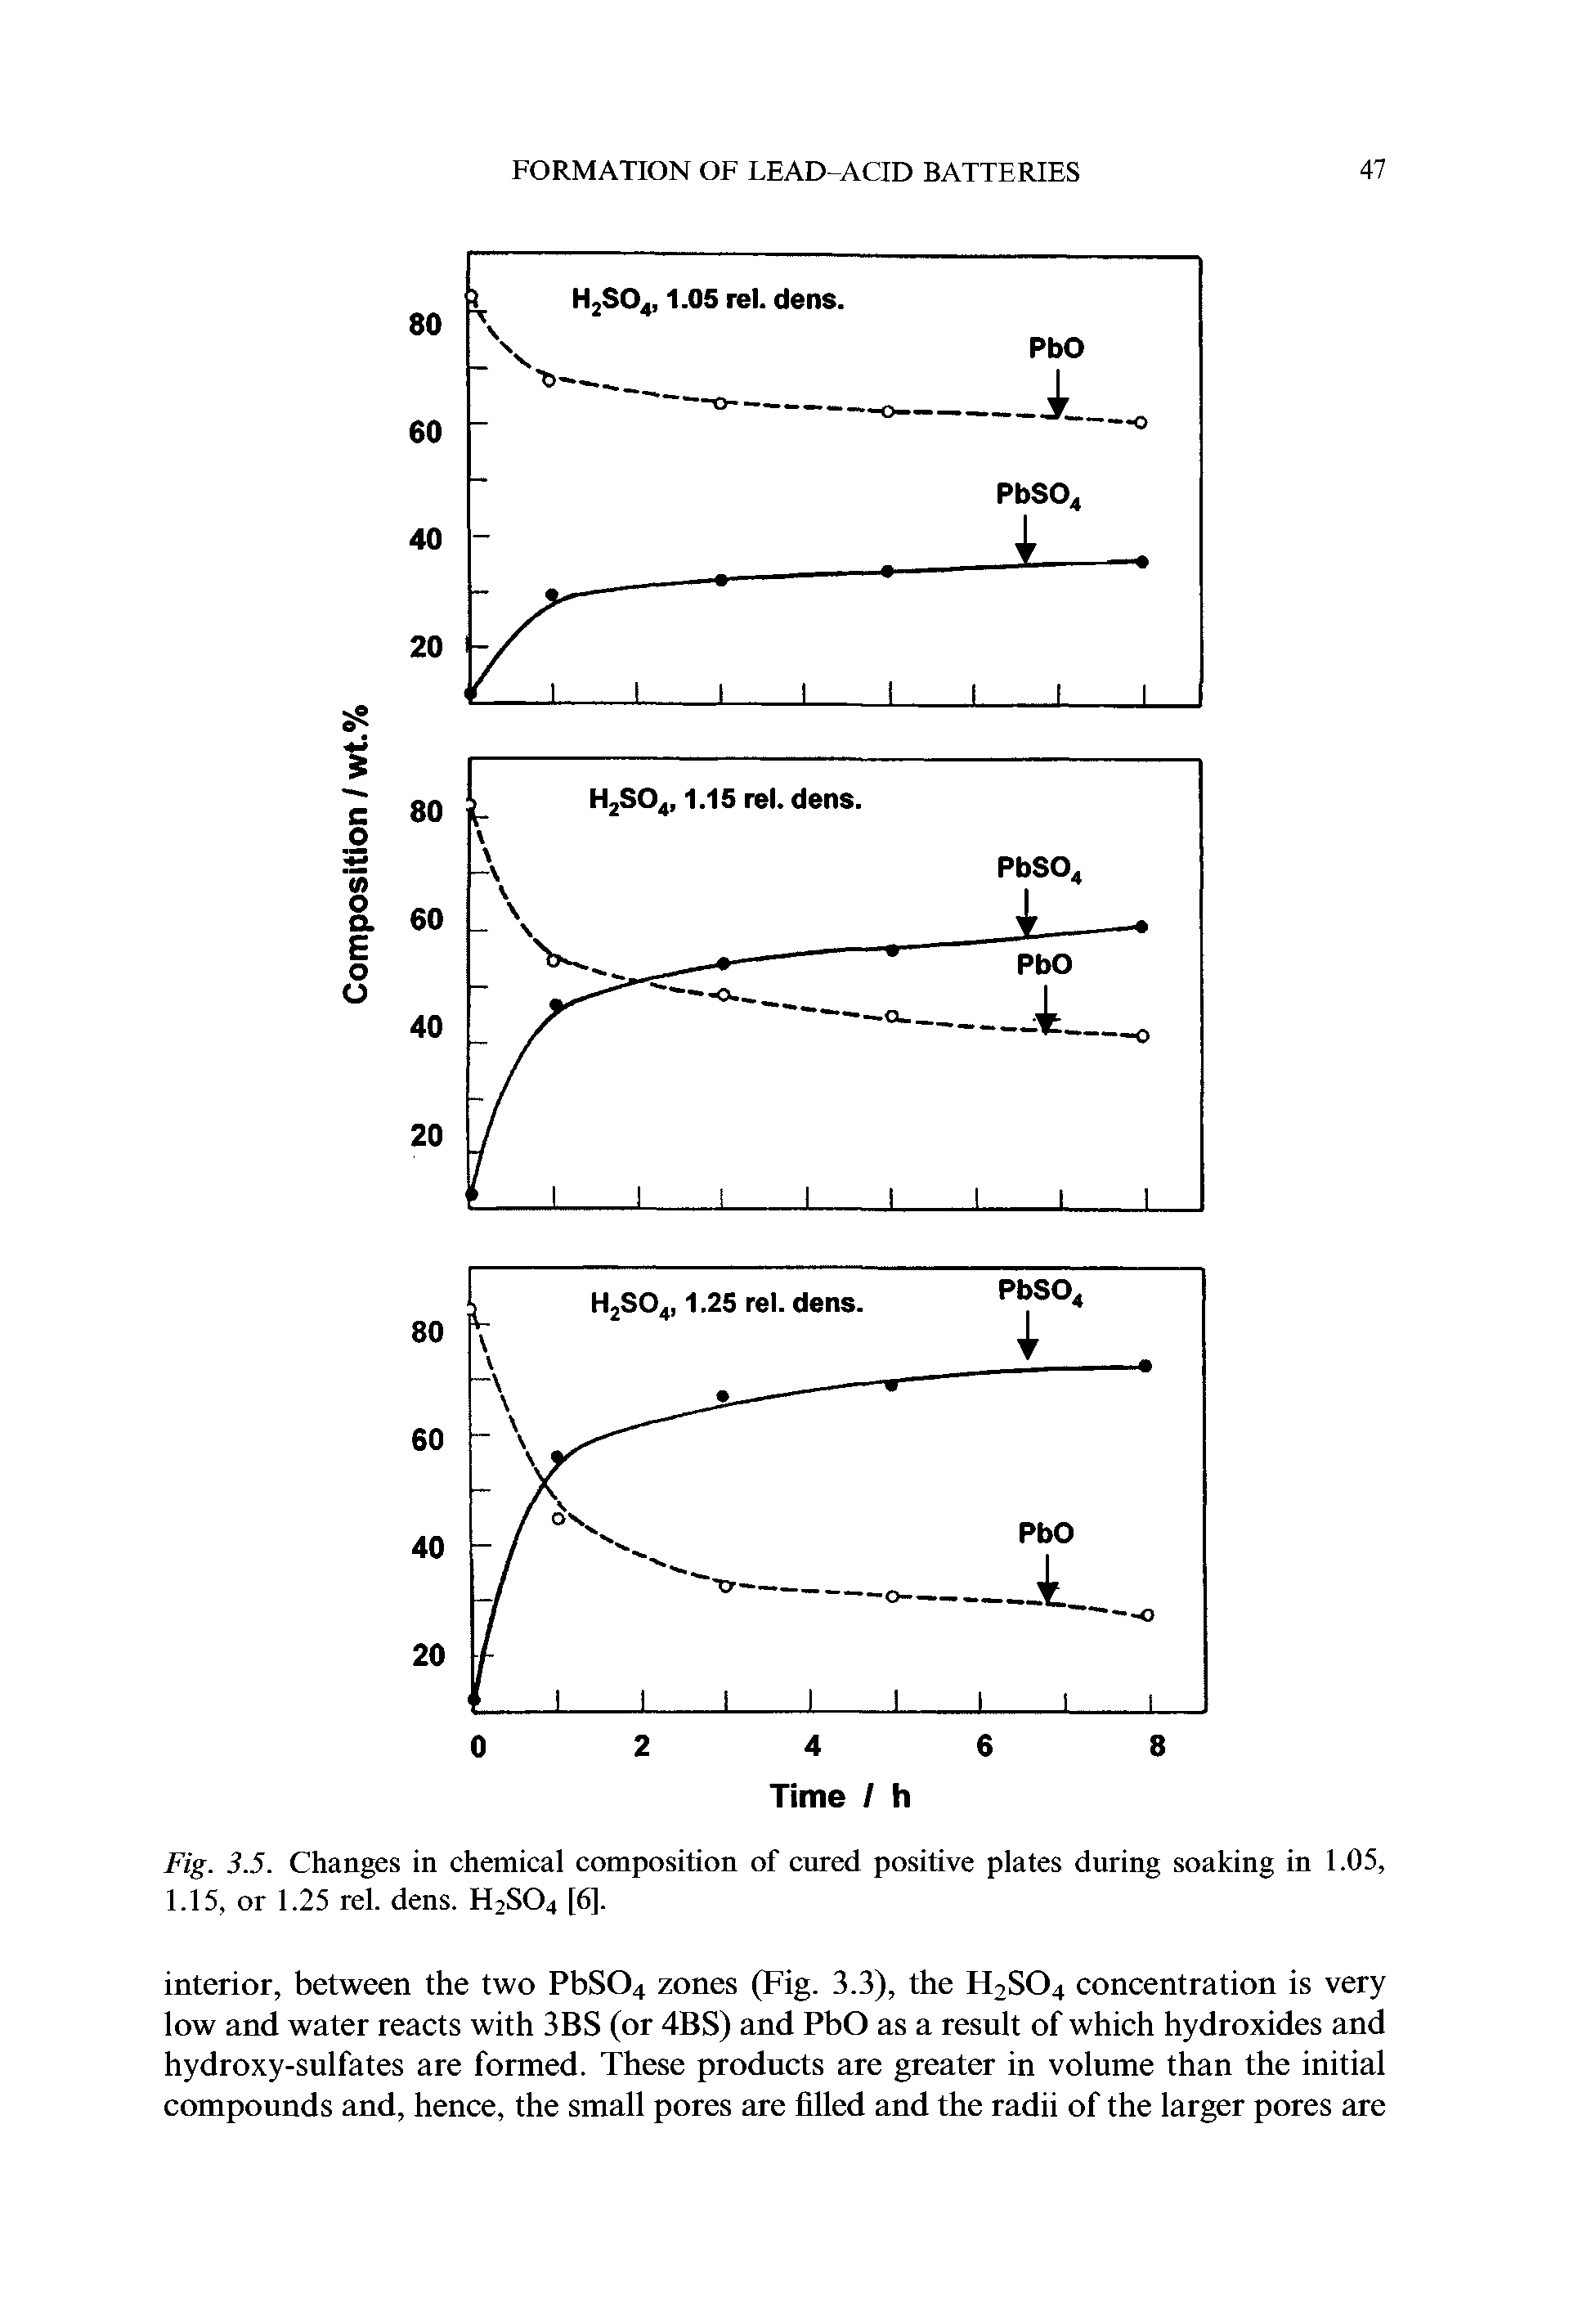 Fig. 3.5. Changes in chemical composition of cured positive plates during soaking in 1.05, 1.15, or 1.25 rel. dens. H2SO4 [6].